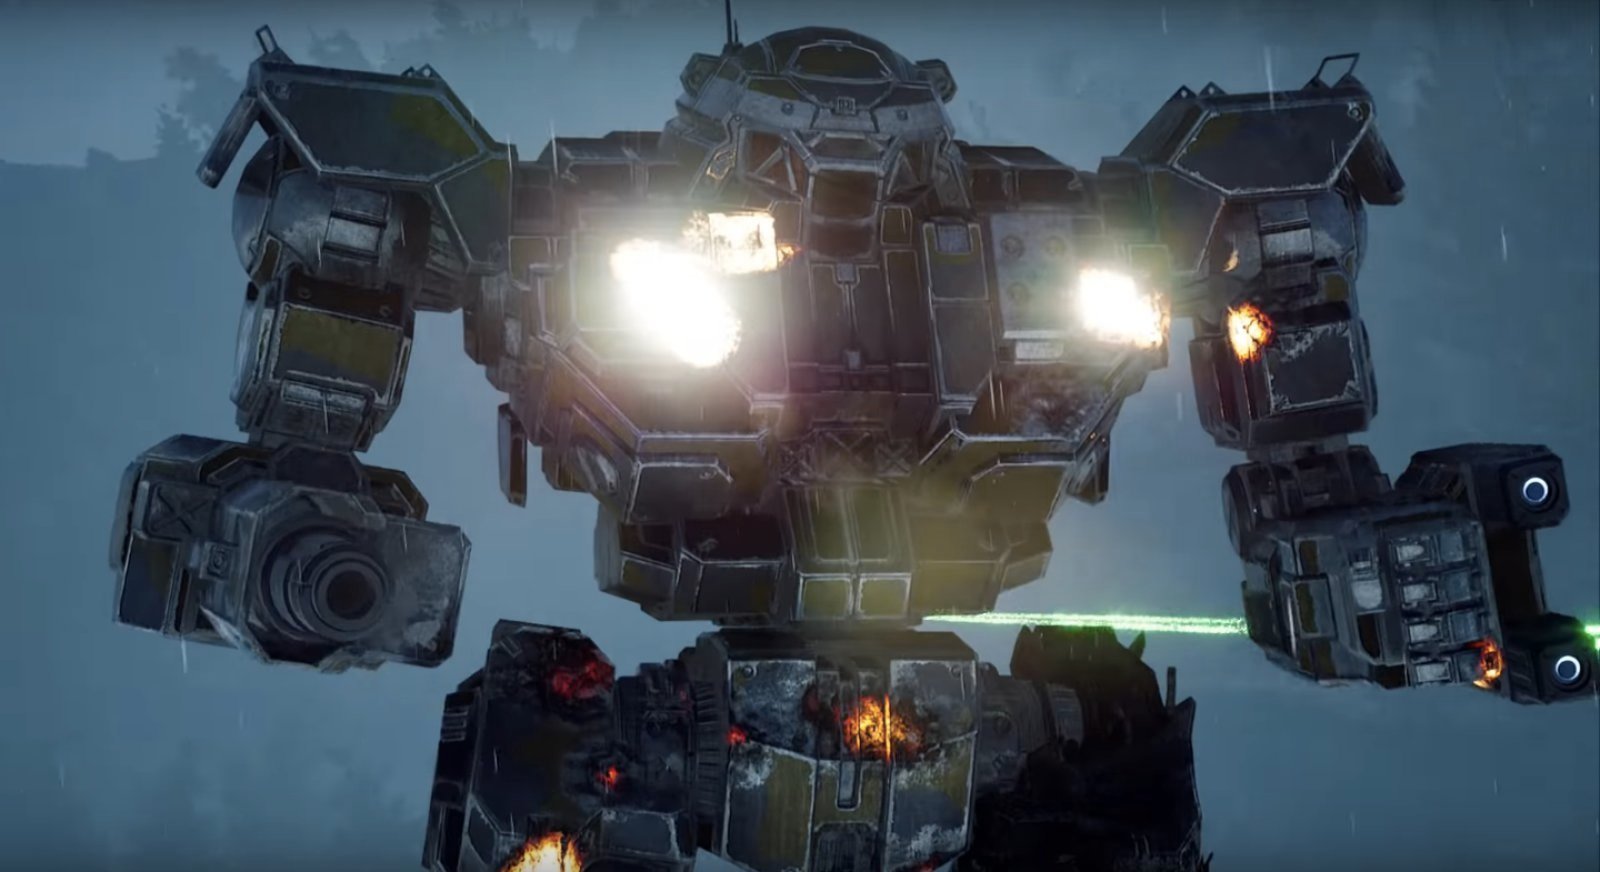 Mechwarrior 5: Mercenaries Has Been Delayed Till December, The Game Also Announced It Will Be An Epic Games Store Exclusive